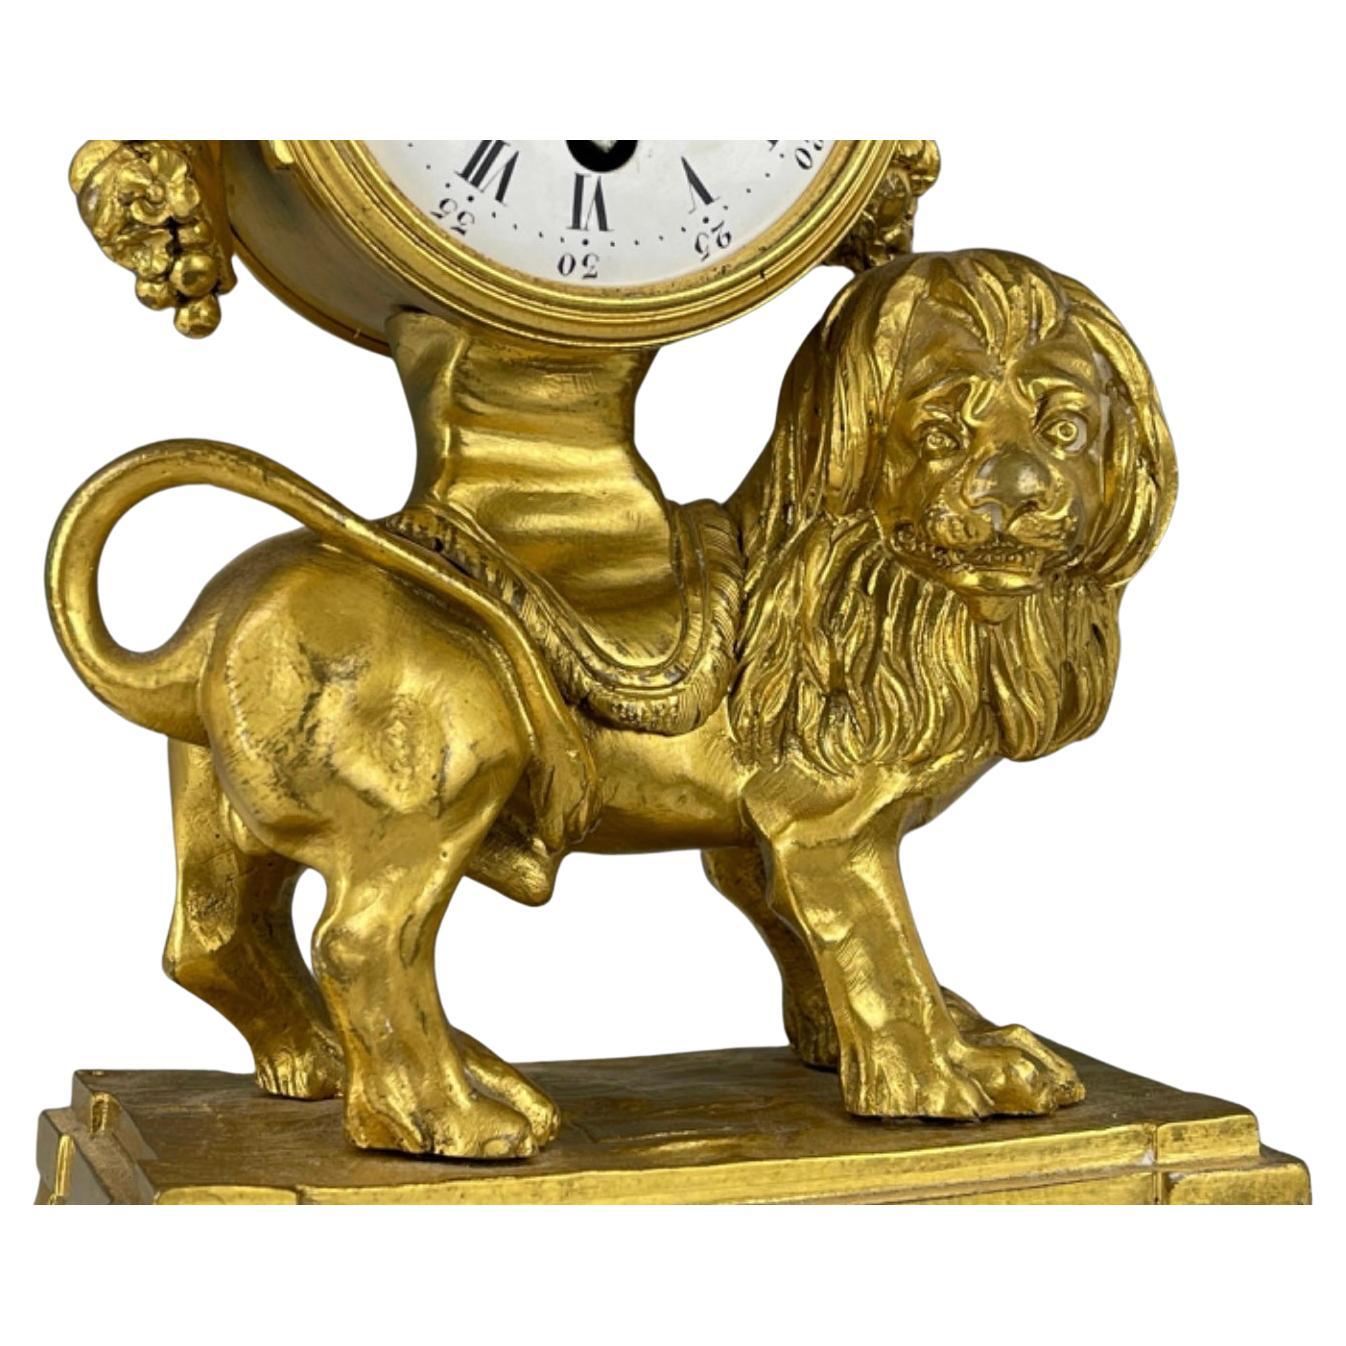 A very good quality Louis XVI Style Gilt Bronze Mantel Clock. French gilt bronze clock with enamel face, fruit and lion motif, on plinth. H 22.3 cm (8.8 in.),
All clocks sold as is with no guarantee they keep accurate time. 